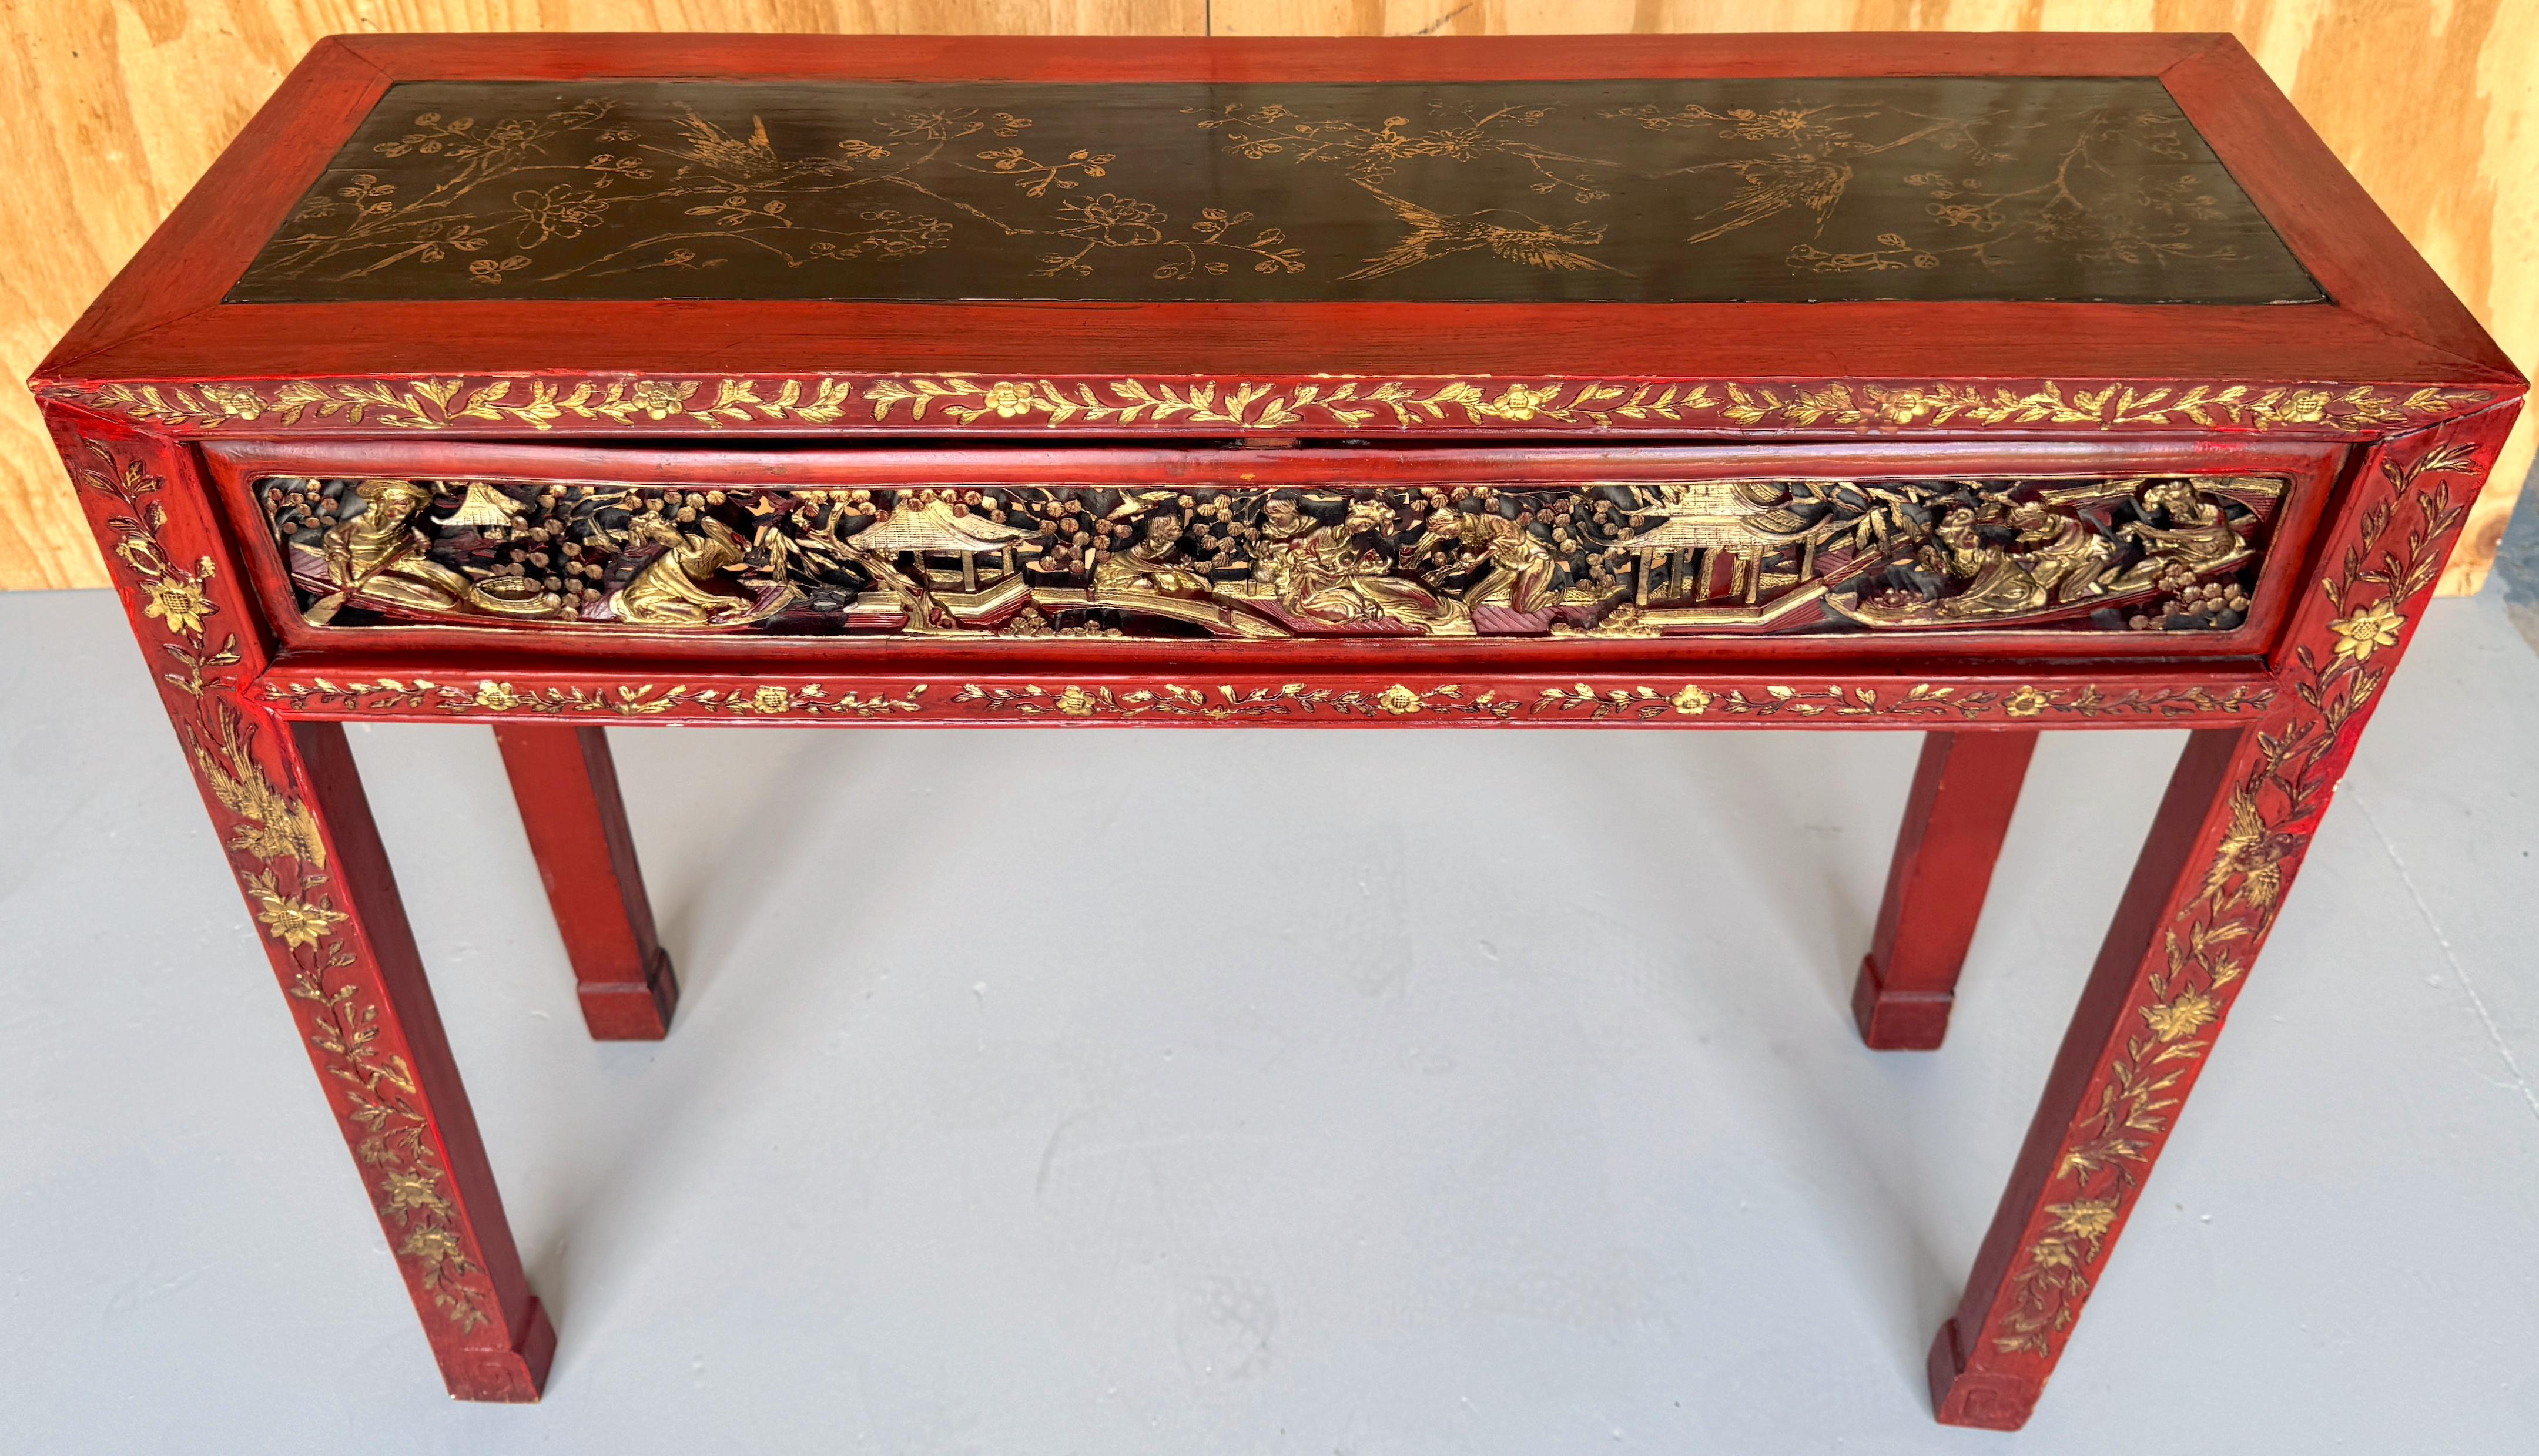 Fine Chinese Qing-period Carved Giltwood and Lacquered Console Table 
China, 19th Century

A stunning example of the elegance of the Qing Period in Chinese furniture. Dating back to the 19th century, this Fine Chinese Qing Period Carved Giltwood and